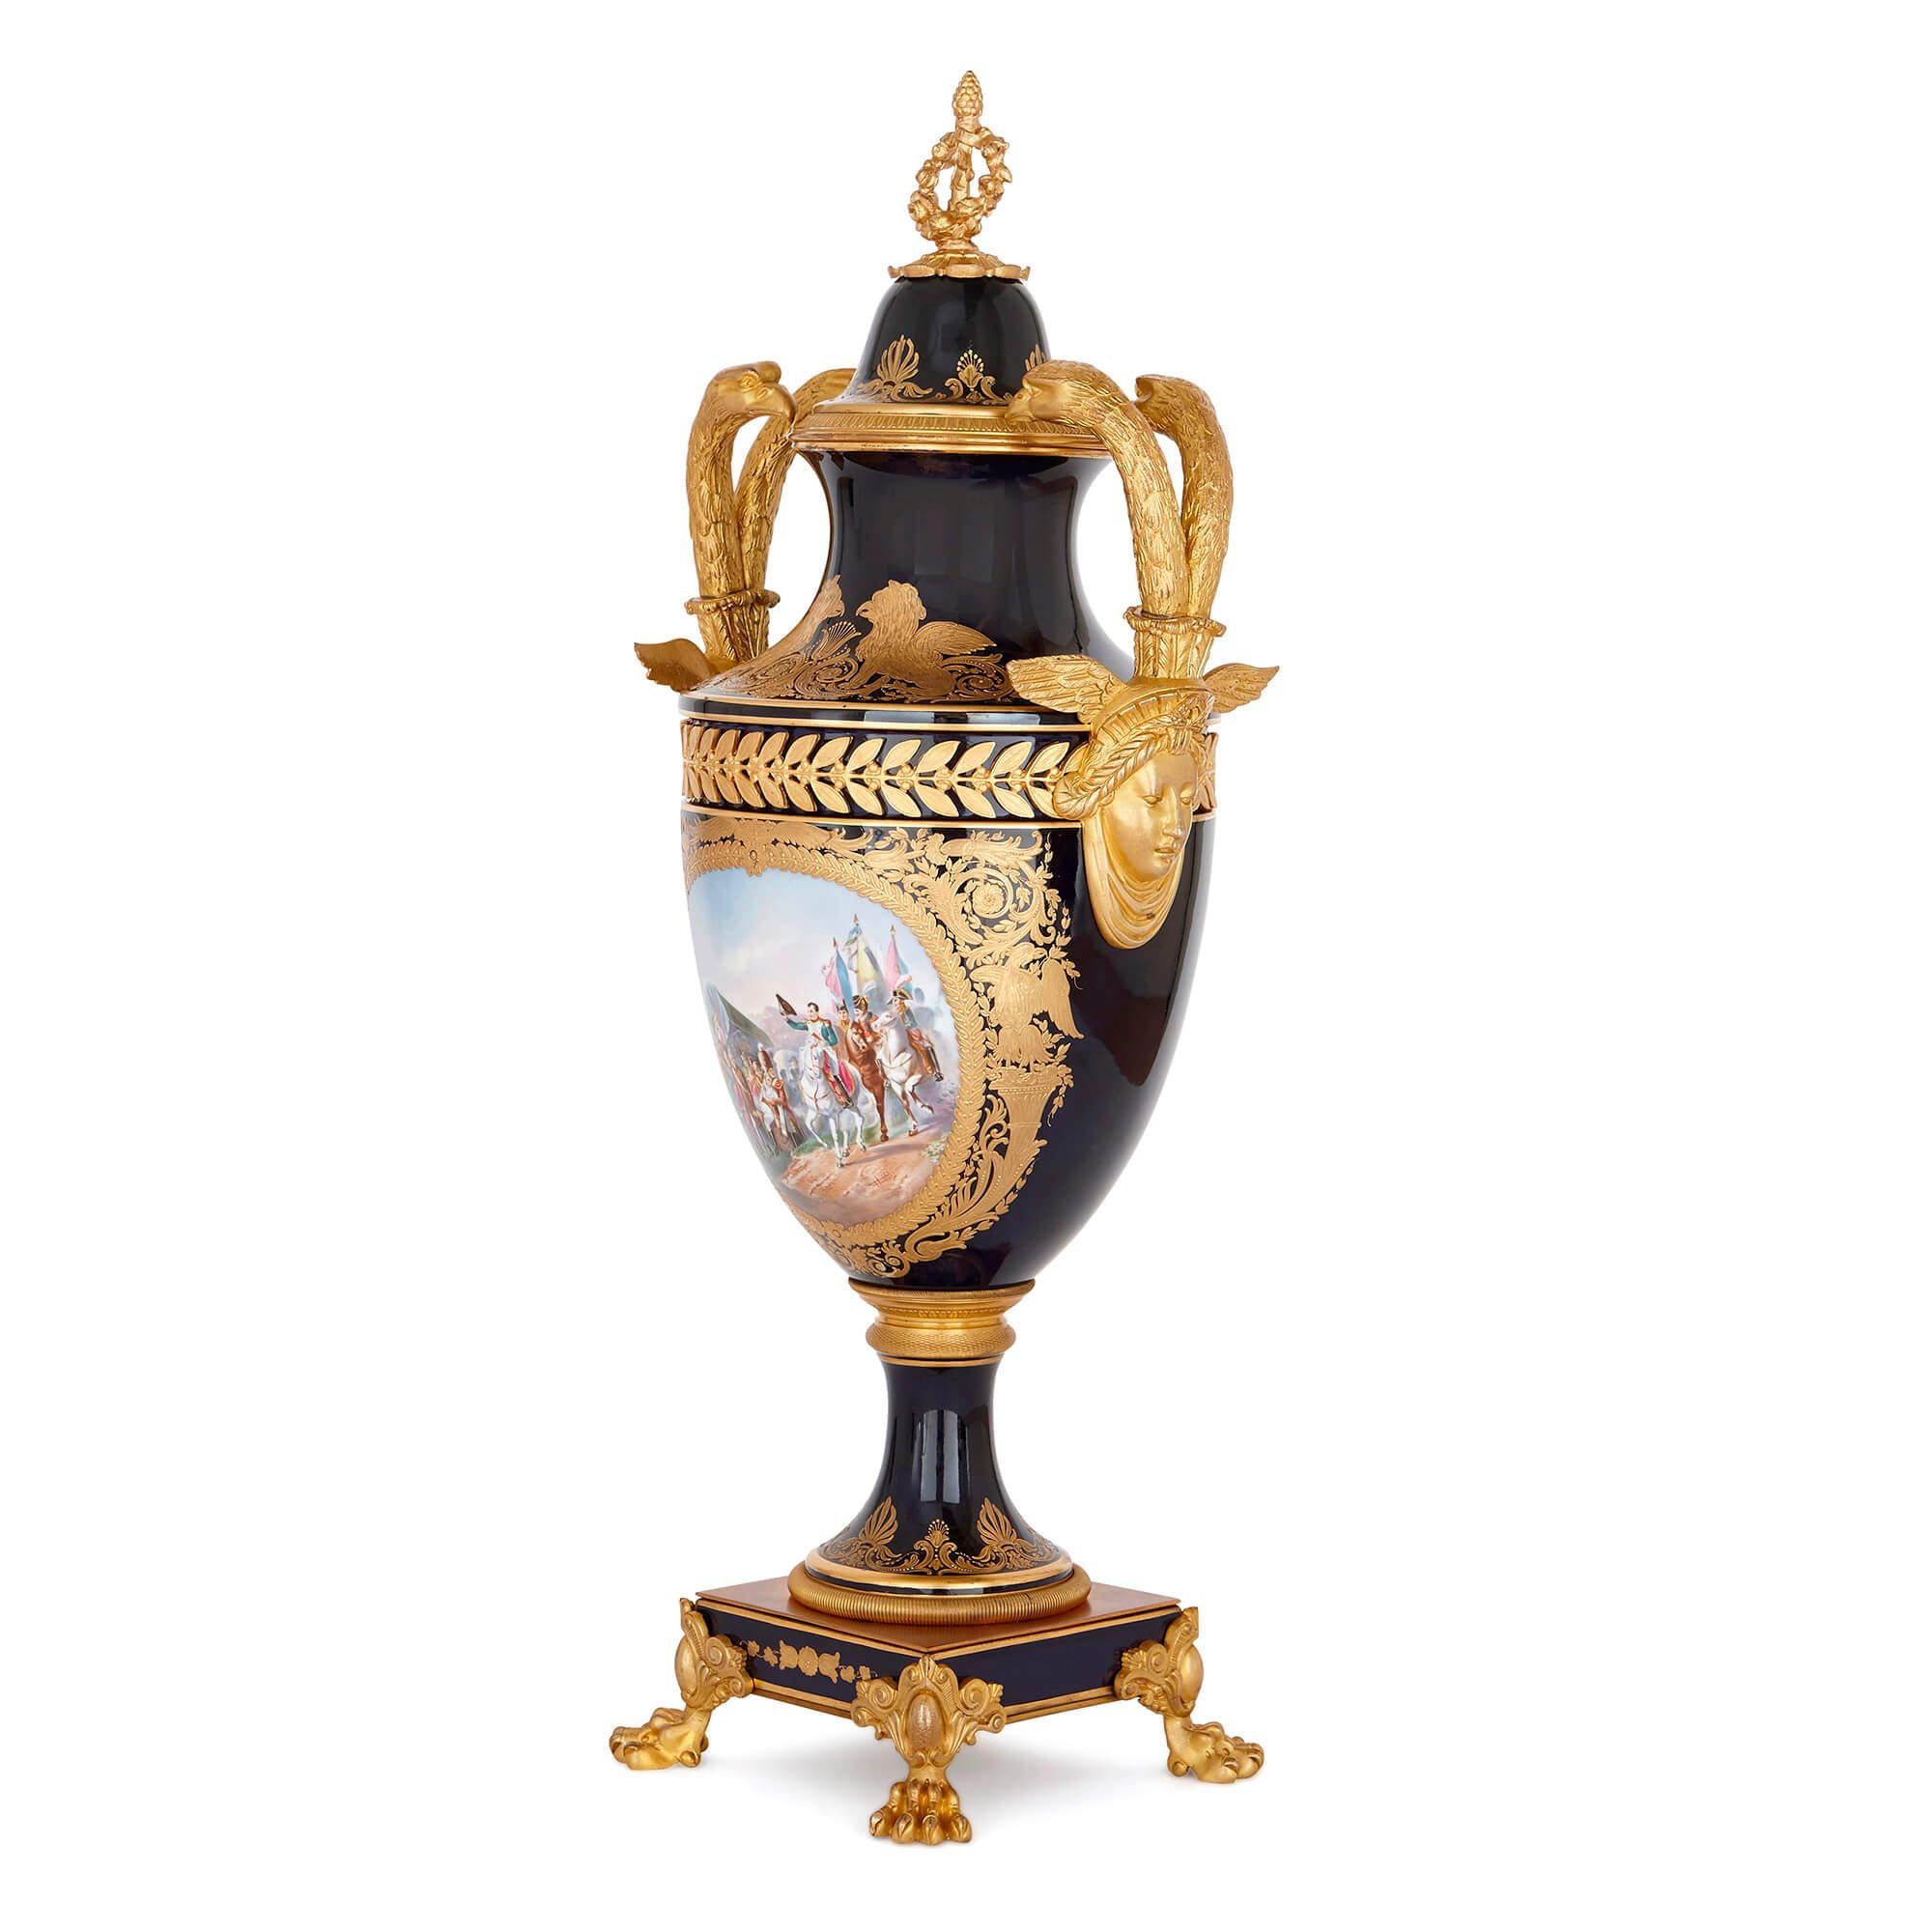 This Sevres style porcelain vase is beautifully painted with an image of Napoleon I on horseback. In this painting, Napoleon visits his men, some of whom are wounded, in what appears to be a military camp. He is seen, leading a group of mounted